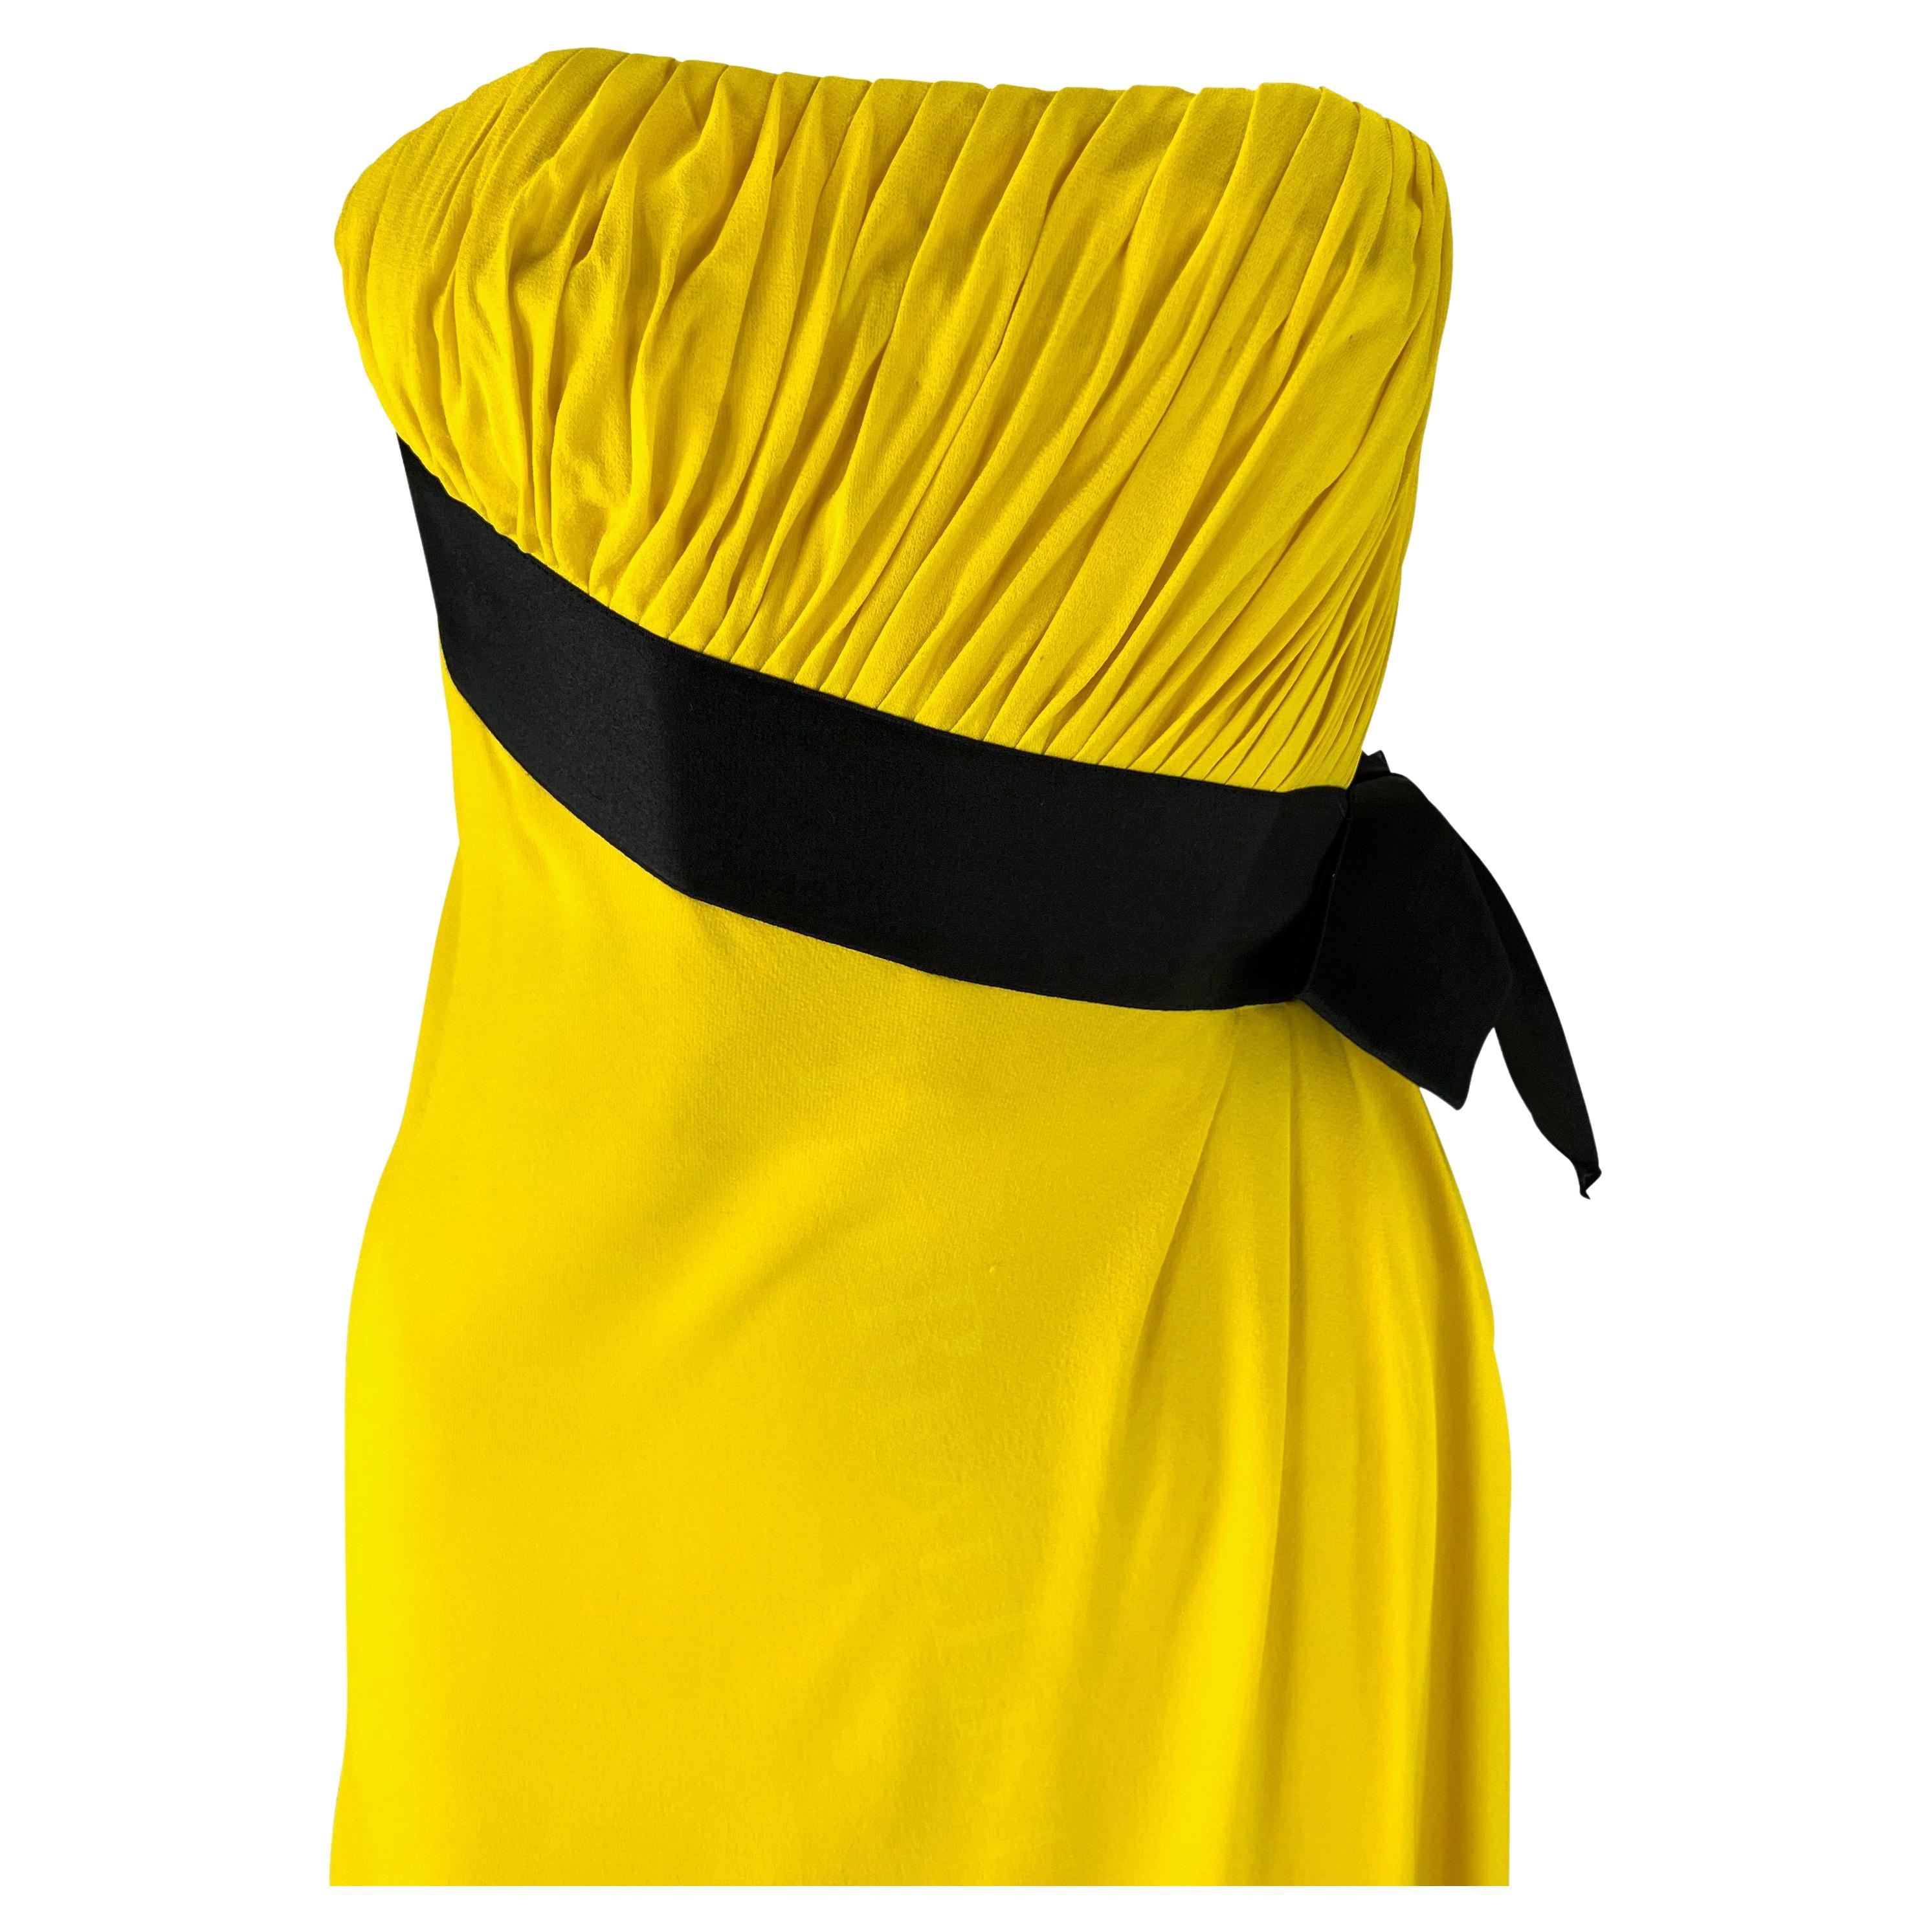 S/S 1991 Chanel by Karl Lagerfeld Runway Ad Yellow Strapless Asymmetric Dress In Excellent Condition For Sale In West Hollywood, CA